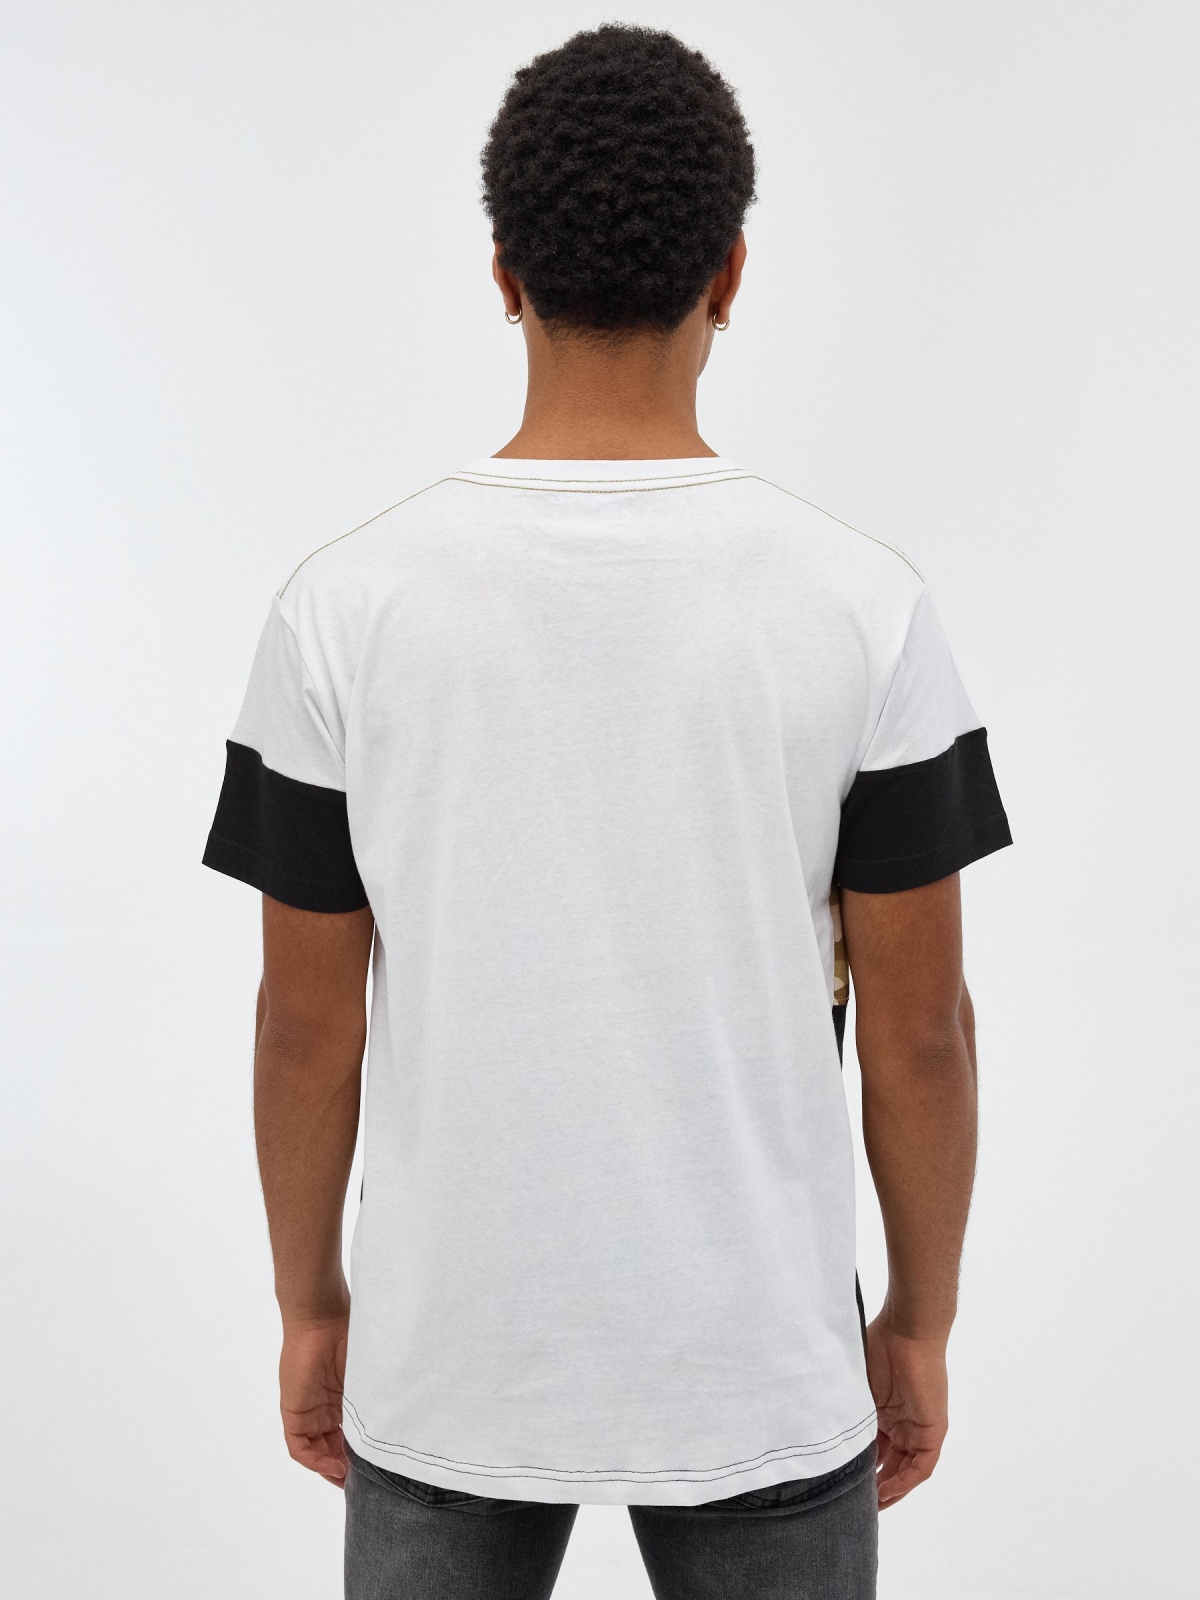 Camouflage print t-shirt white middle back view